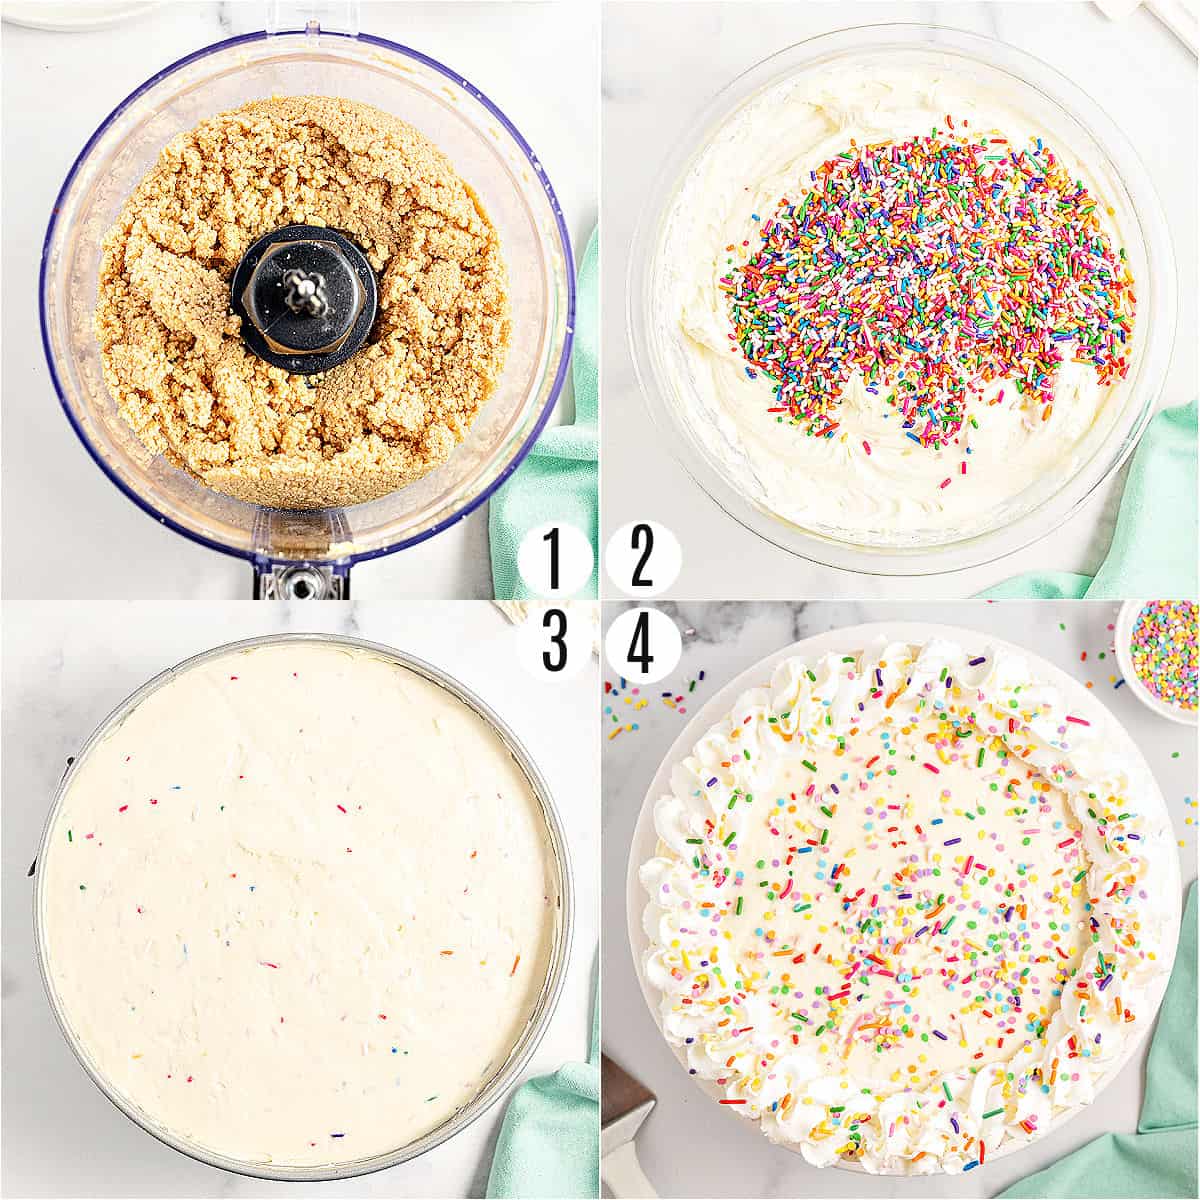 Step by step photos showing how to make no bake funfetti cheesecake.